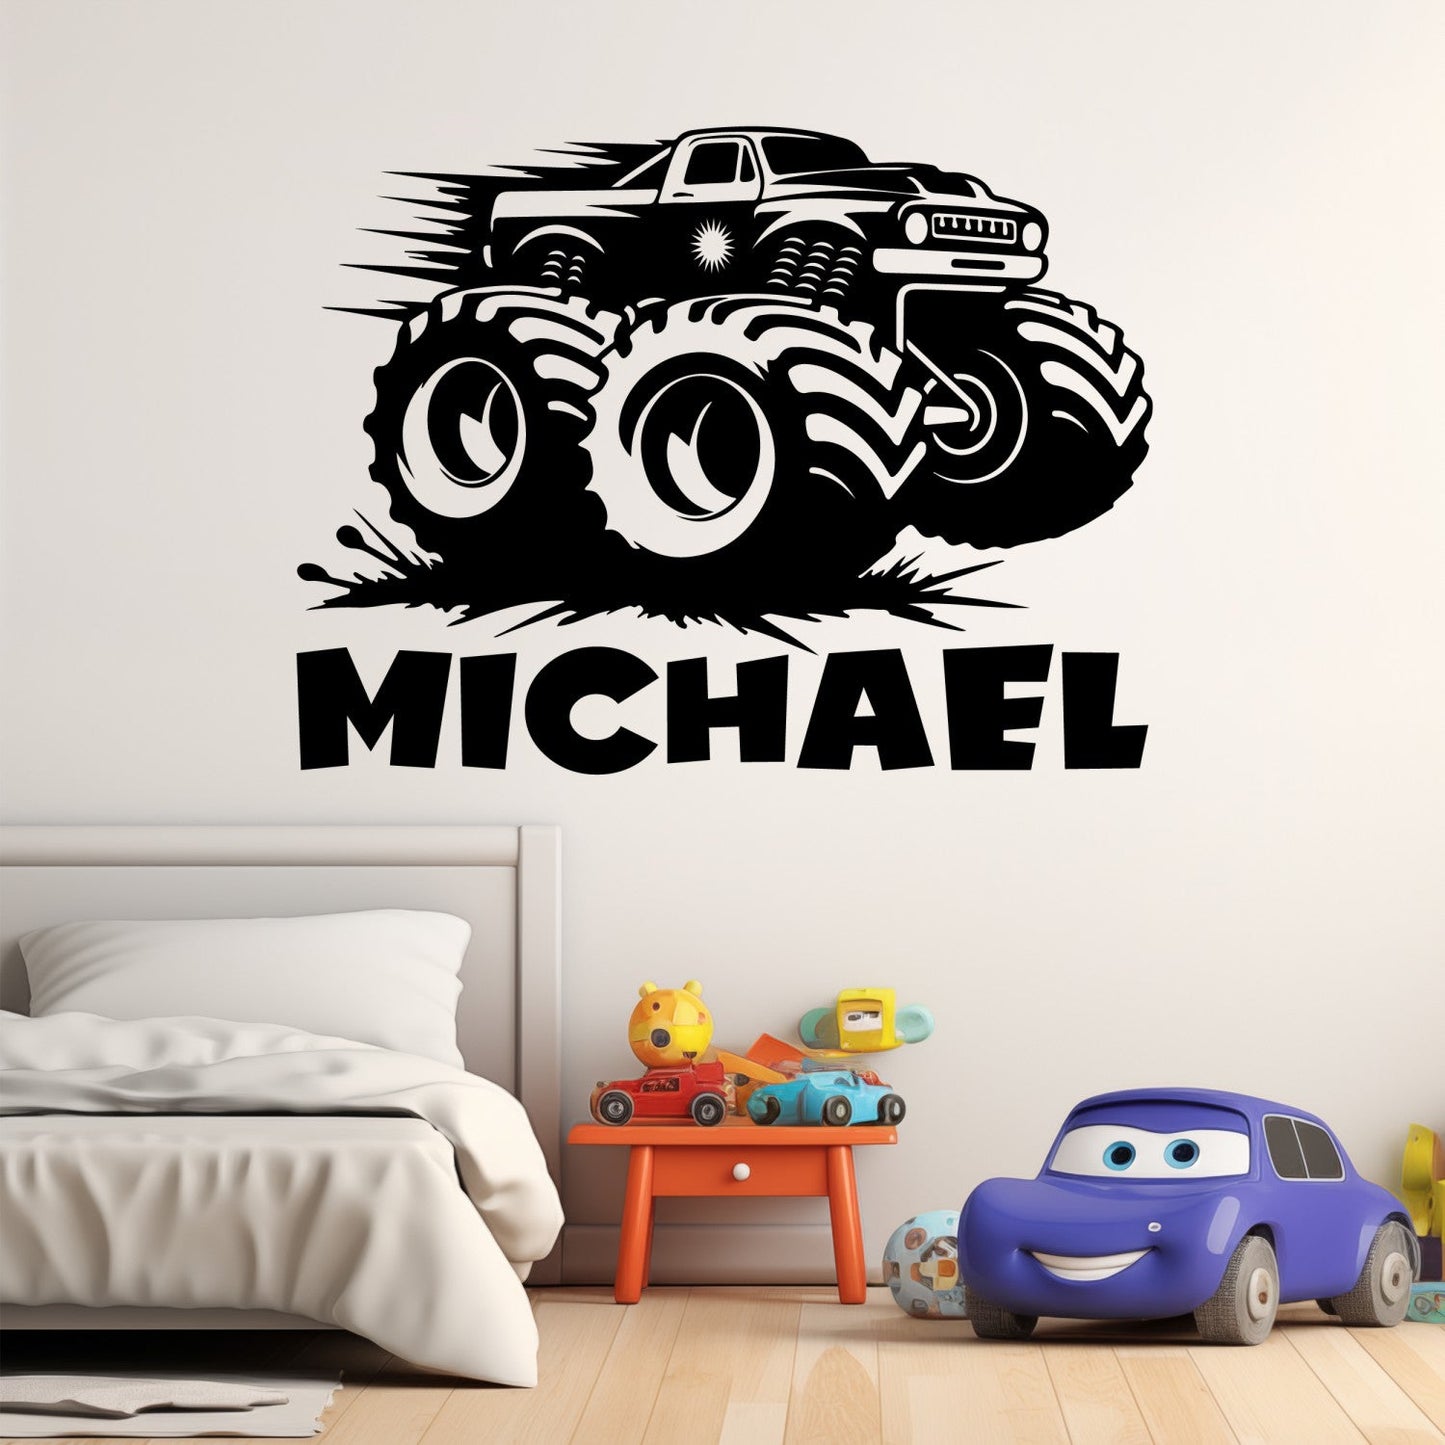 Monster Truck Wall Stickers - large monster truck wall stickers - Monster Jam Wall Decals for Boys Room - Car Wall Decals for Boys Room